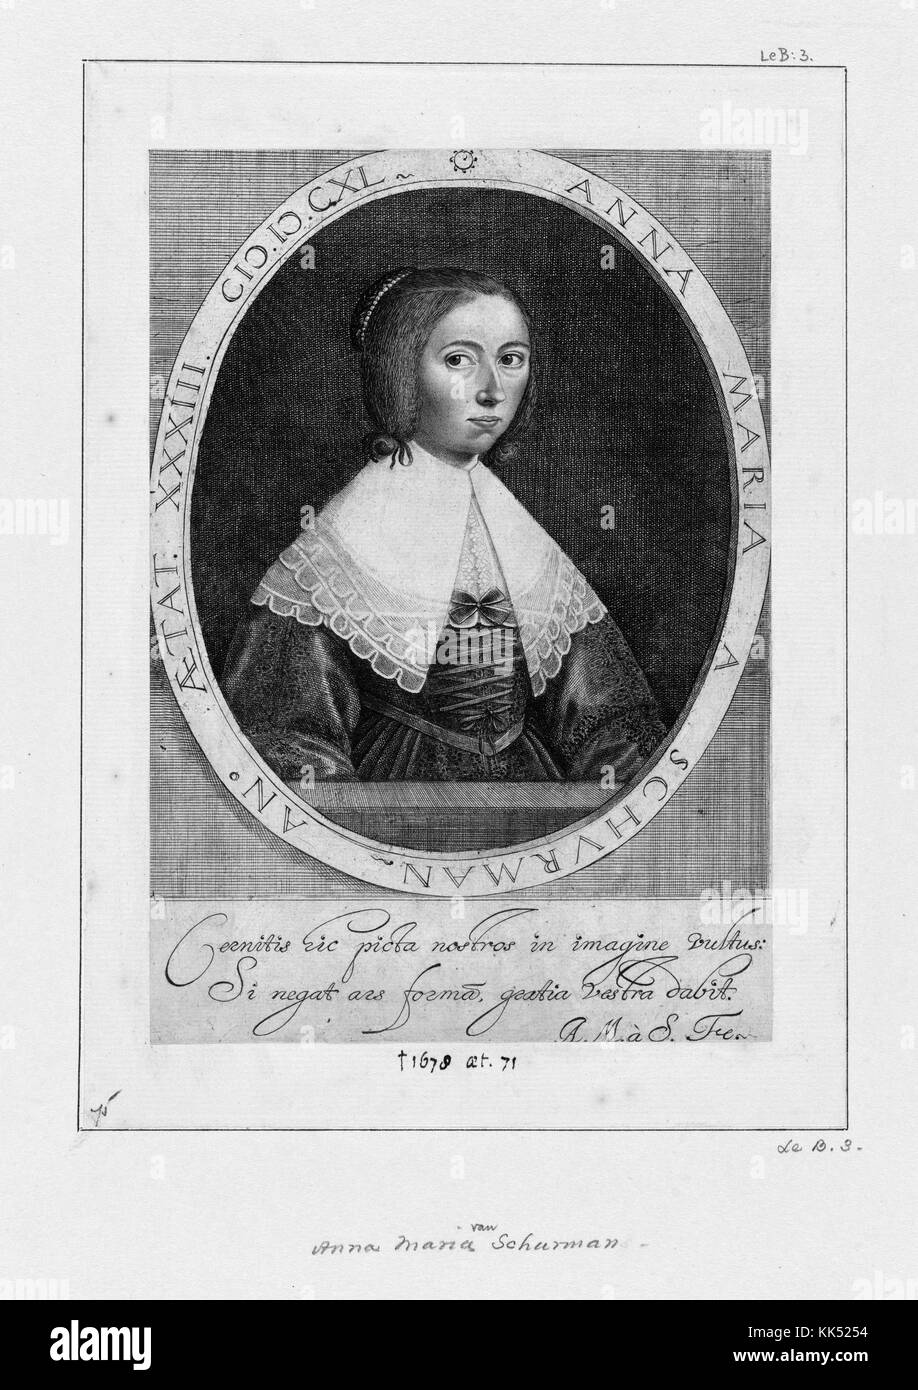 Engraved self portrait of Anna Maria van Schurman, German-born Dutch painter, engraver, poet, and scholar, who is best known for her exceptional learning and her defense of female education, depicted at the age of 33 years, 1640. From the New York Public Library. Stock Photo